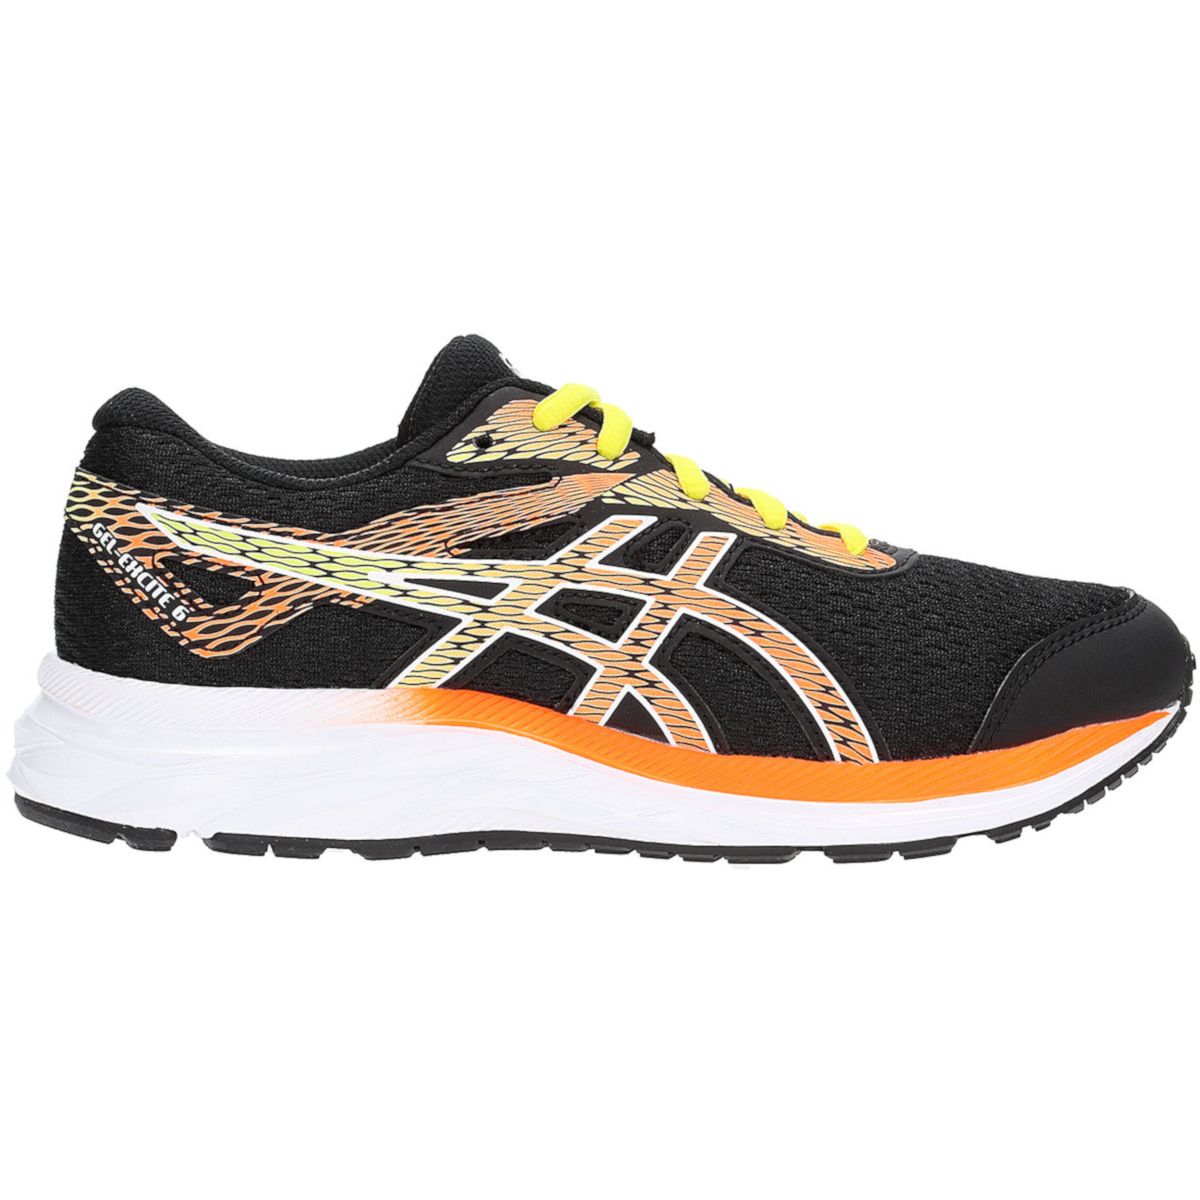 Asics Gel Excite 6 GS Junior Running Shoes 1014A079-003